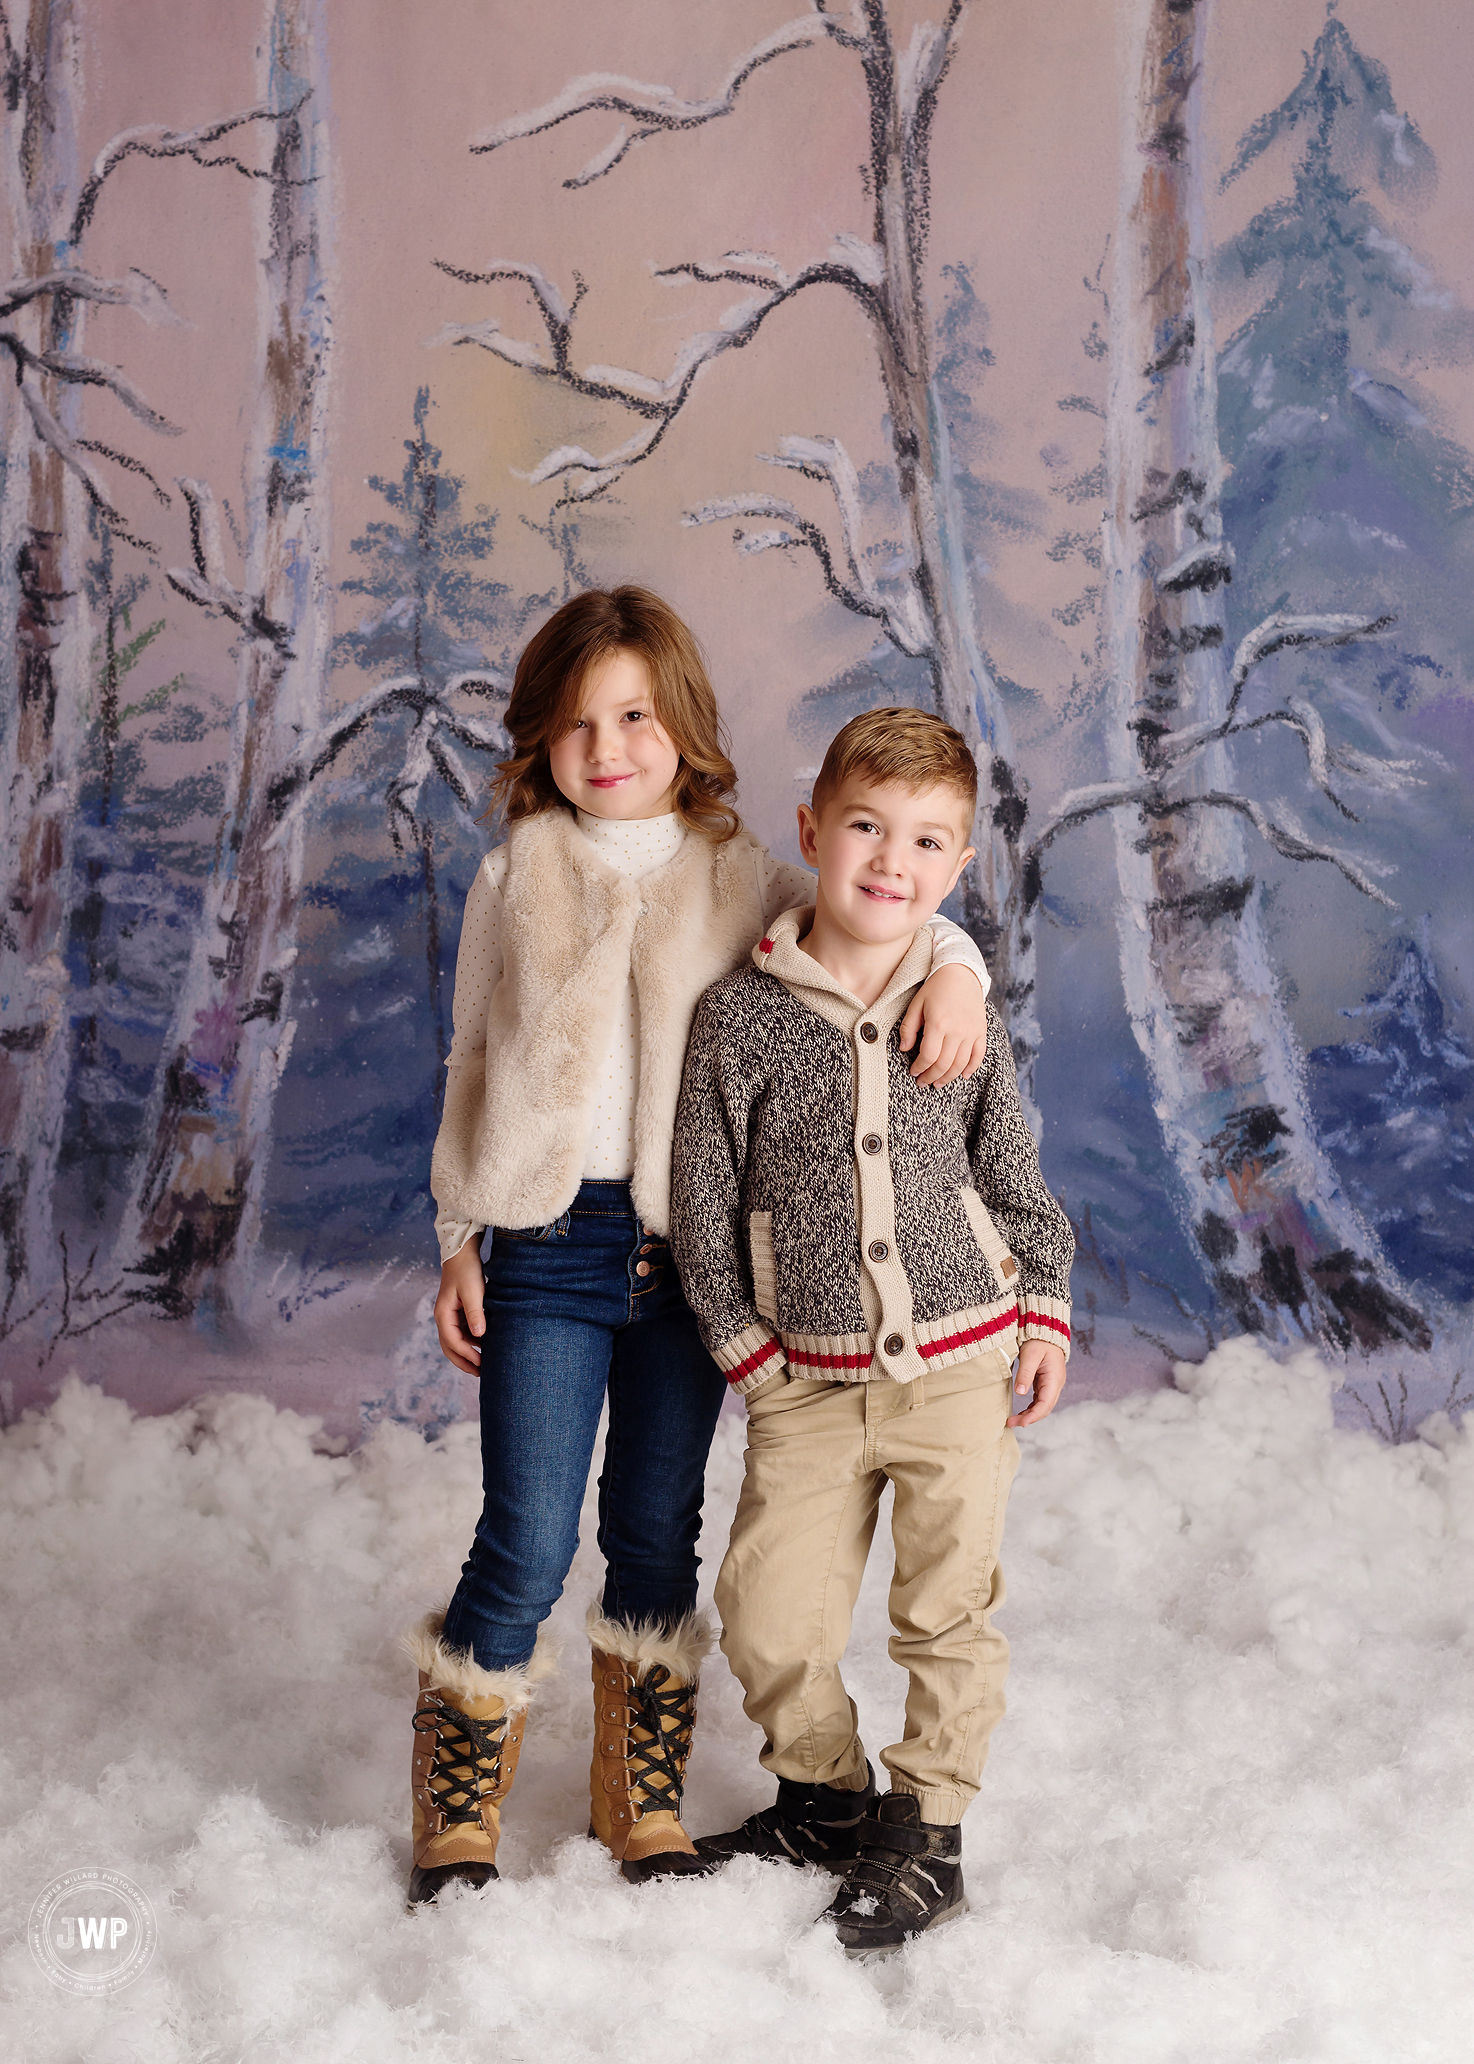 brother sister Holiday Winter scene snow Kingston mini session photographer